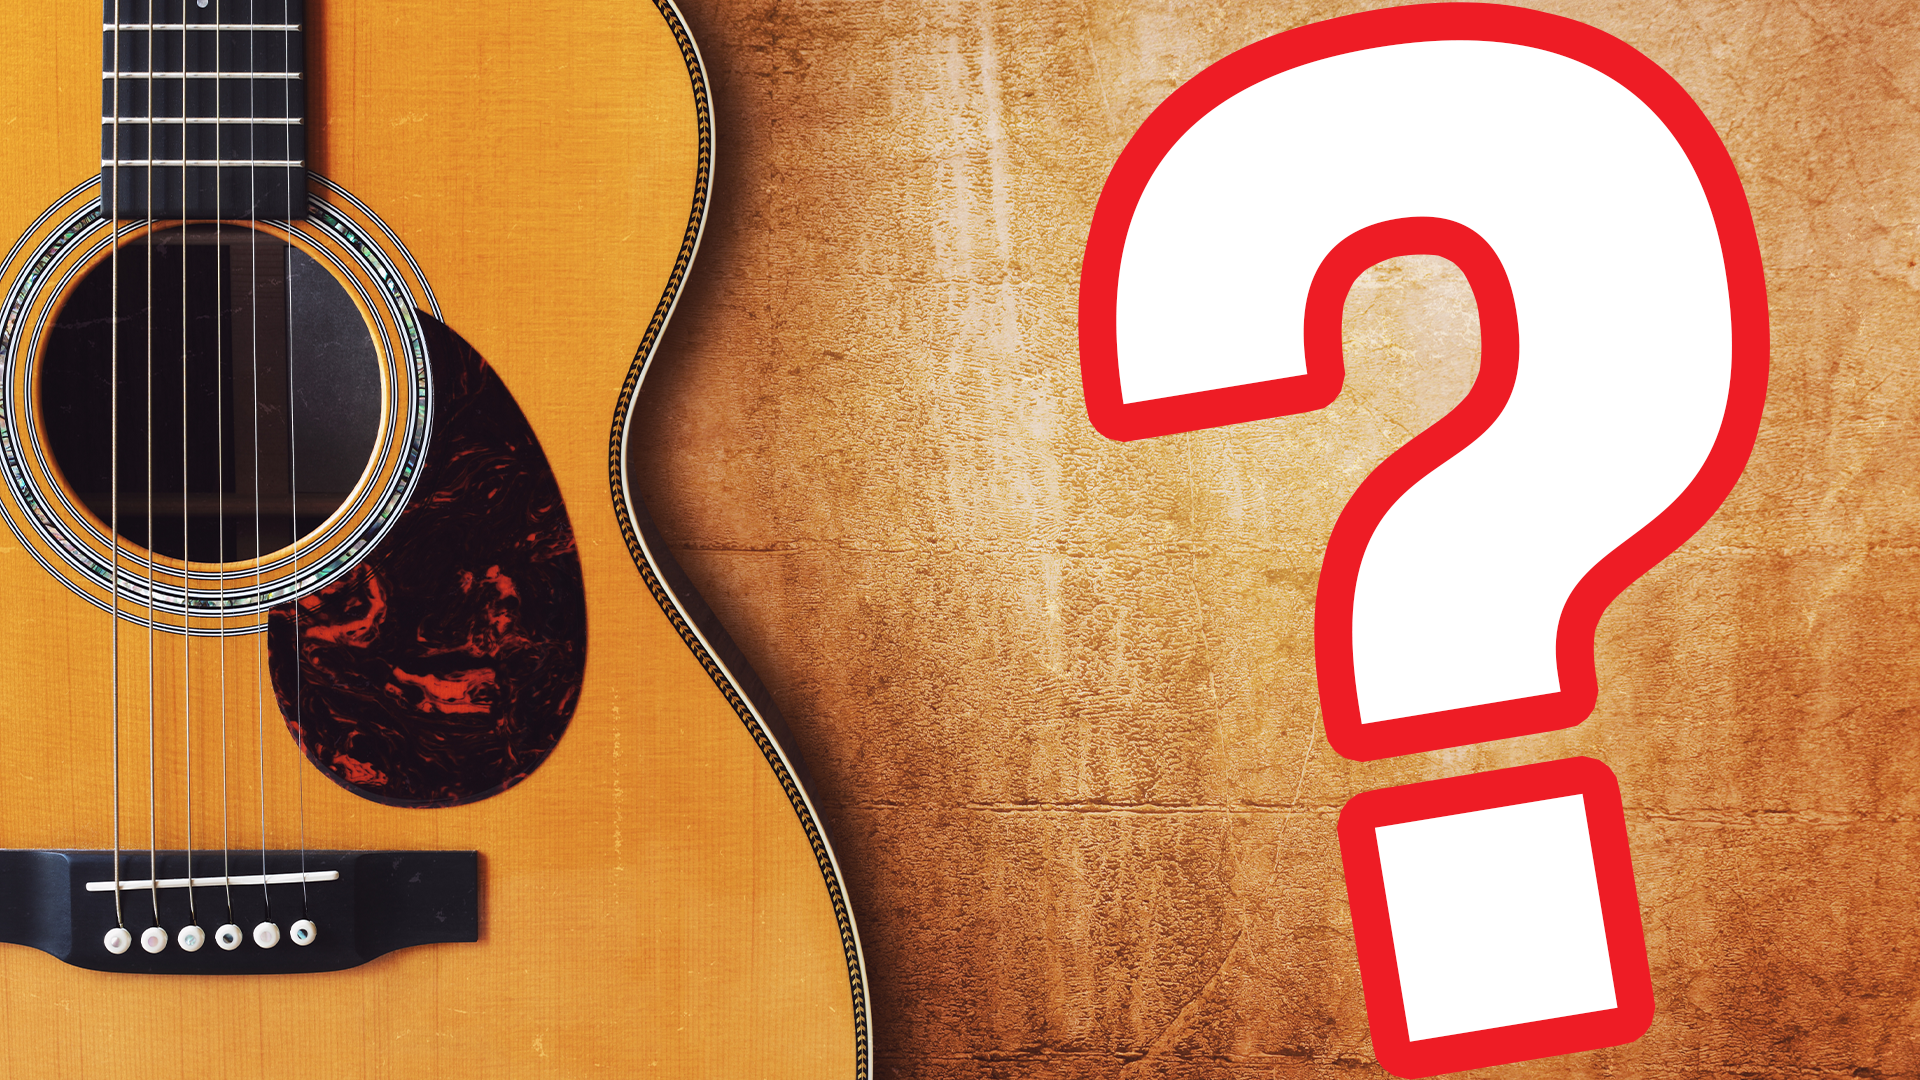 Guitar and question mark